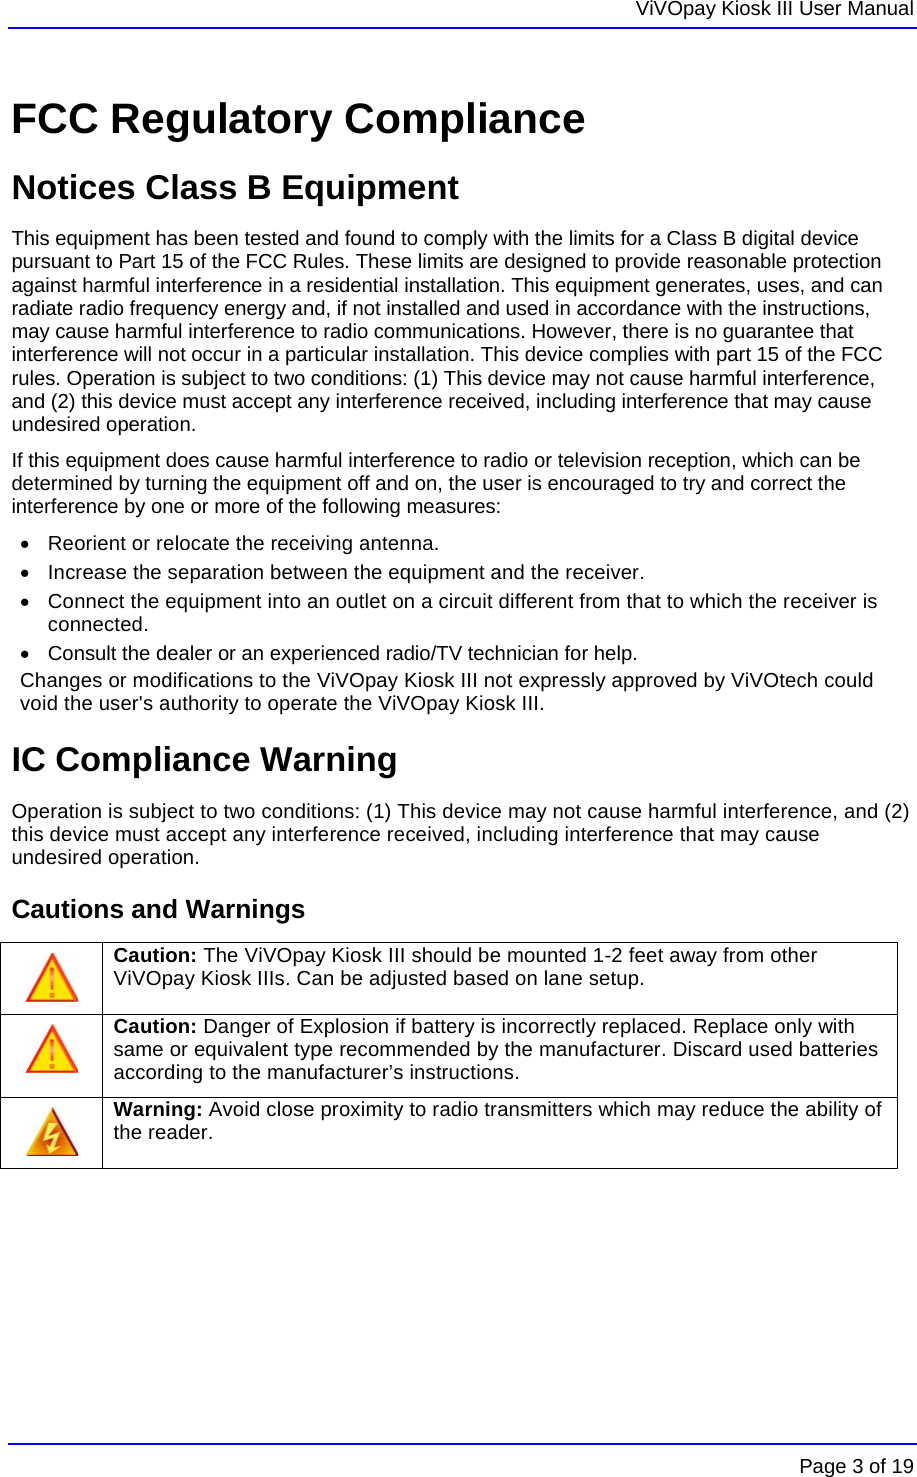   ViVOpay Kiosk III User Manual    Page 3 of 19 FCC Regulatory Compliance Notices Class B Equipment This equipment has been tested and found to comply with the limits for a Class B digital device pursuant to Part 15 of the FCC Rules. These limits are designed to provide reasonable protection against harmful interference in a residential installation. This equipment generates, uses, and can radiate radio frequency energy and, if not installed and used in accordance with the instructions, may cause harmful interference to radio communications. However, there is no guarantee that interference will not occur in a particular installation. This device complies with part 15 of the FCC rules. Operation is subject to two conditions: (1) This device may not cause harmful interference, and (2) this device must accept any interference received, including interference that may cause undesired operation. If this equipment does cause harmful interference to radio or television reception, which can be determined by turning the equipment off and on, the user is encouraged to try and correct the interference by one or more of the following measures: •  Reorient or relocate the receiving antenna.  •  Increase the separation between the equipment and the receiver. •  Connect the equipment into an outlet on a circuit different from that to which the receiver is connected.  •  Consult the dealer or an experienced radio/TV technician for help.  Changes or modifications to the ViVOpay Kiosk III not expressly approved by ViVOtech could void the user&apos;s authority to operate the ViVOpay Kiosk III. IC Compliance Warning Operation is subject to two conditions: (1) This device may not cause harmful interference, and (2) this device must accept any interference received, including interference that may cause undesired operation. Cautions and Warnings  Caution: The ViVOpay Kiosk III should be mounted 1-2 feet away from other ViVOpay Kiosk IIIs. Can be adjusted based on lane setup.  Caution: Danger of Explosion if battery is incorrectly replaced. Replace only with same or equivalent type recommended by the manufacturer. Discard used batteries according to the manufacturer’s instructions.  Warning: Avoid close proximity to radio transmitters which may reduce the ability of the reader. 